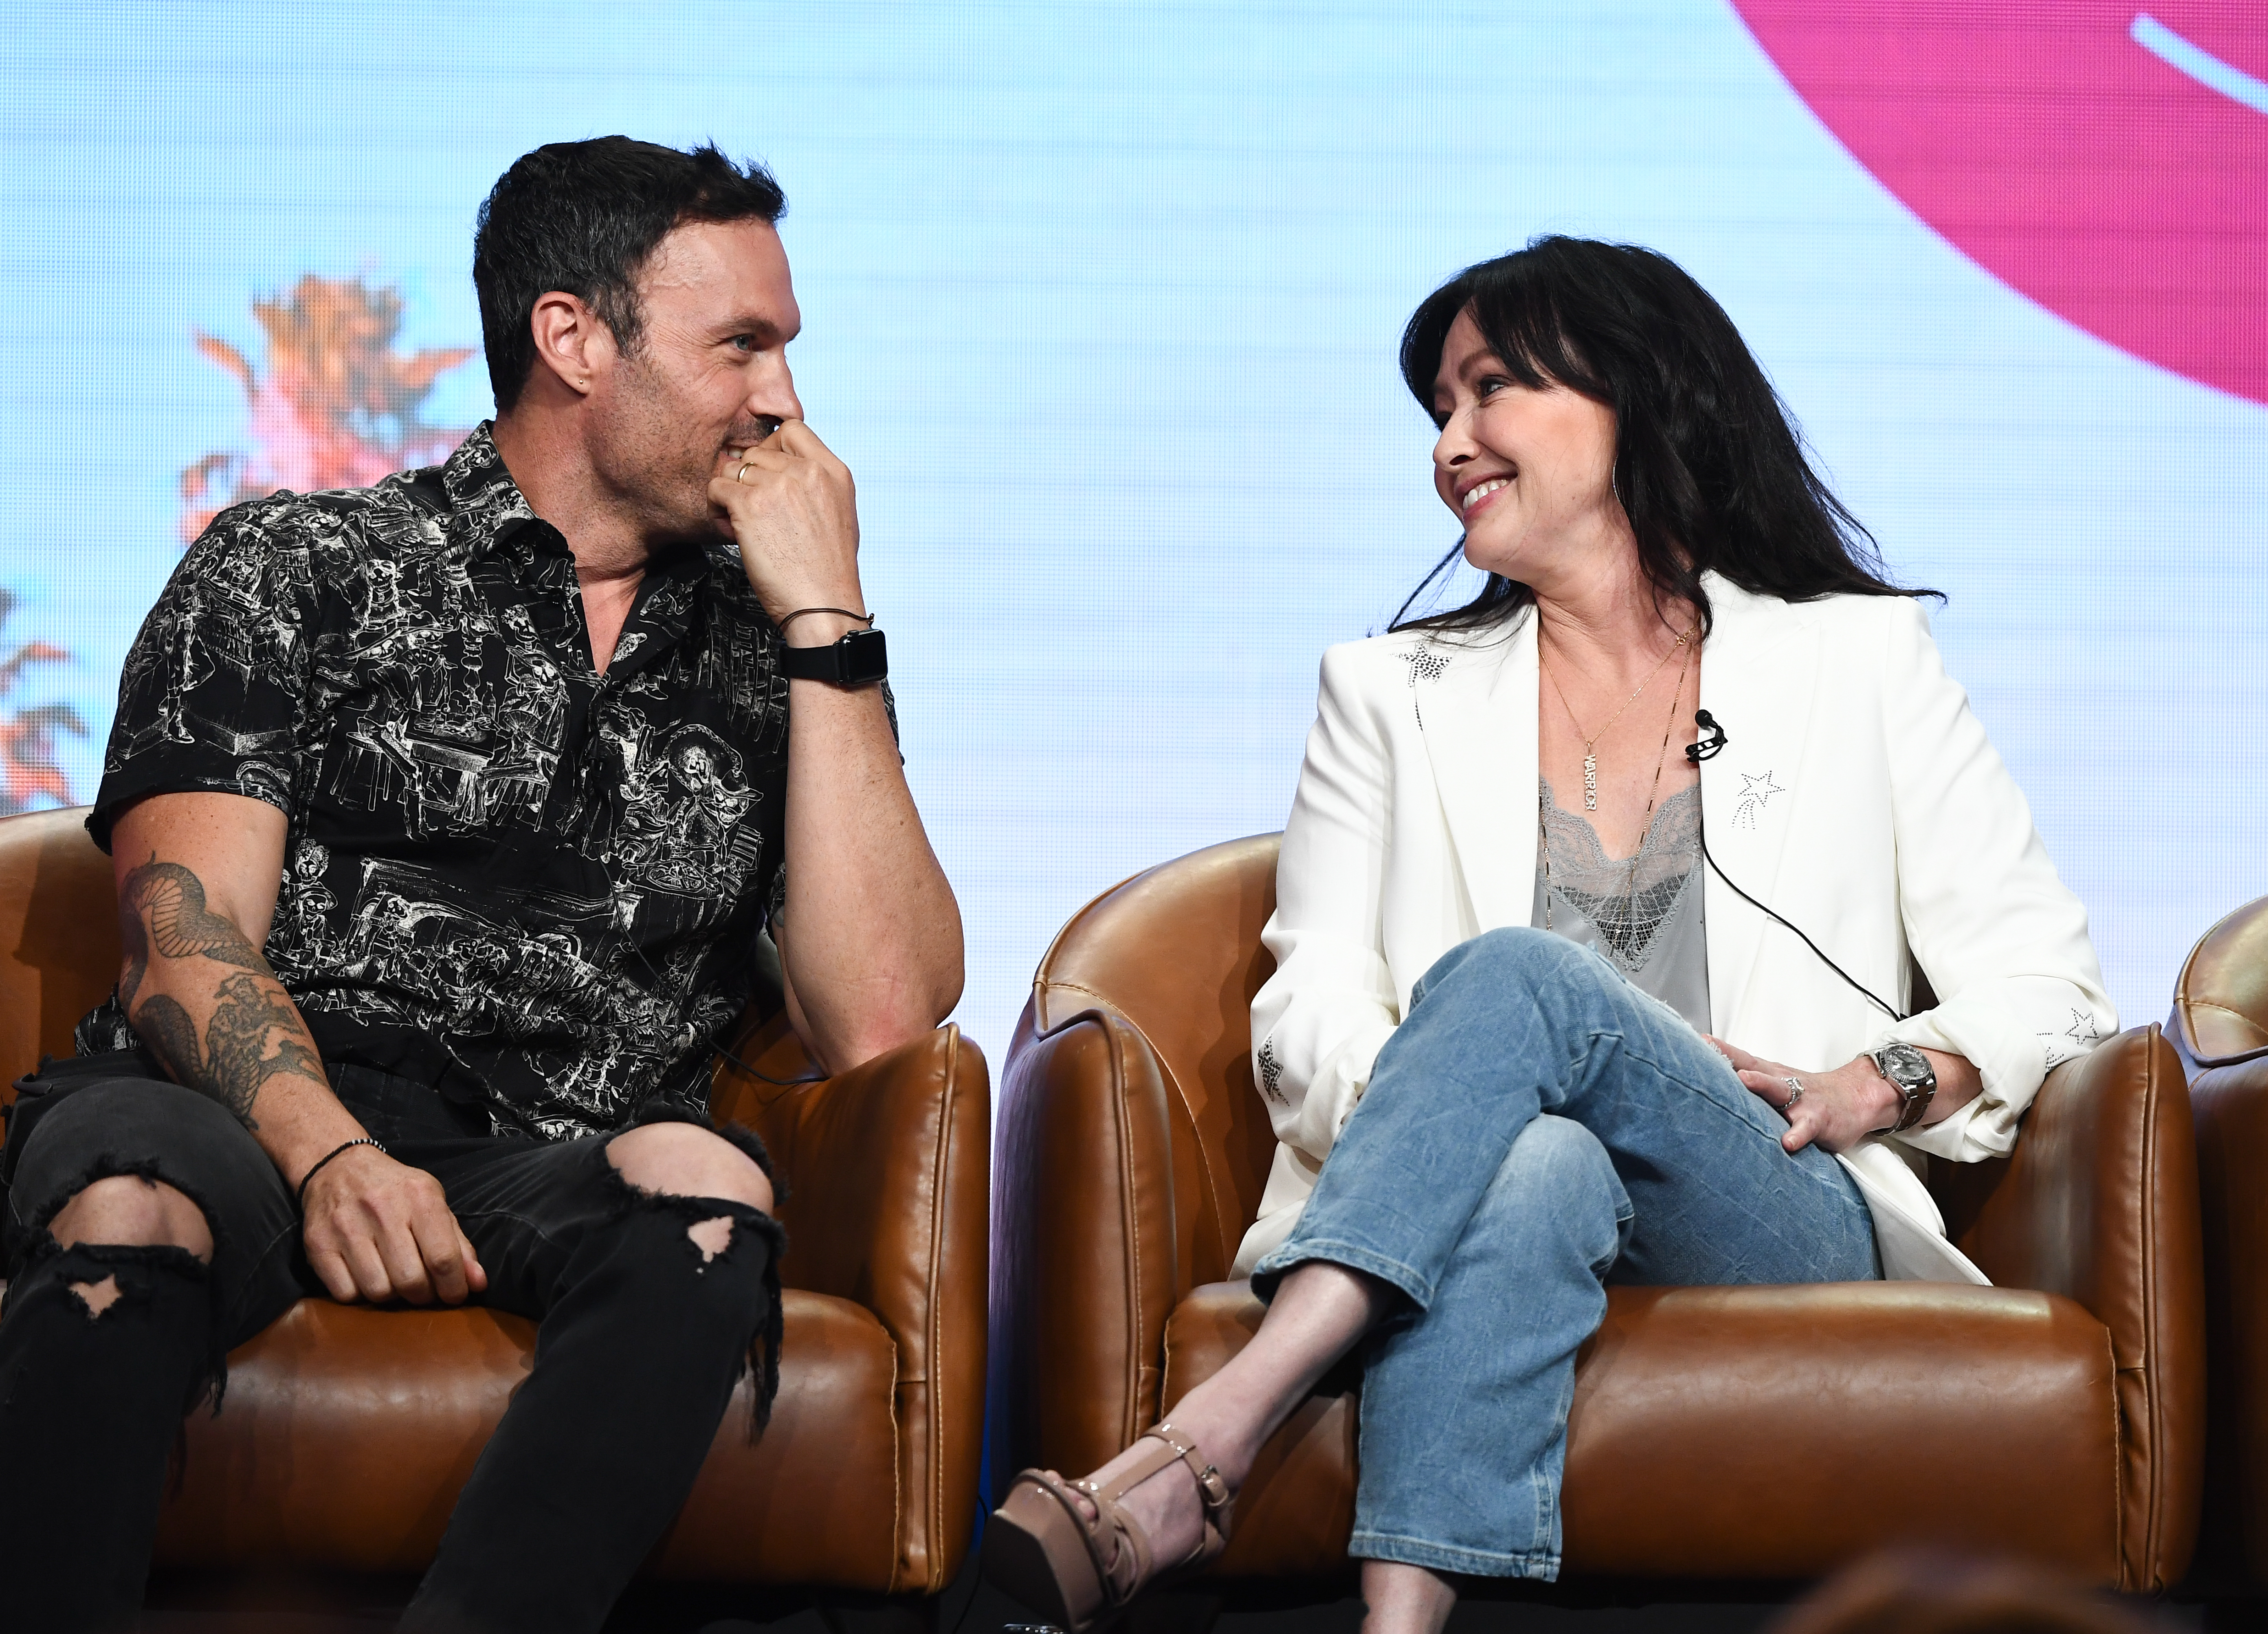 Brian Austin Green and Shannen Doherty on August 7, 2019 in Los Angeles, California. | Source: Getty Images